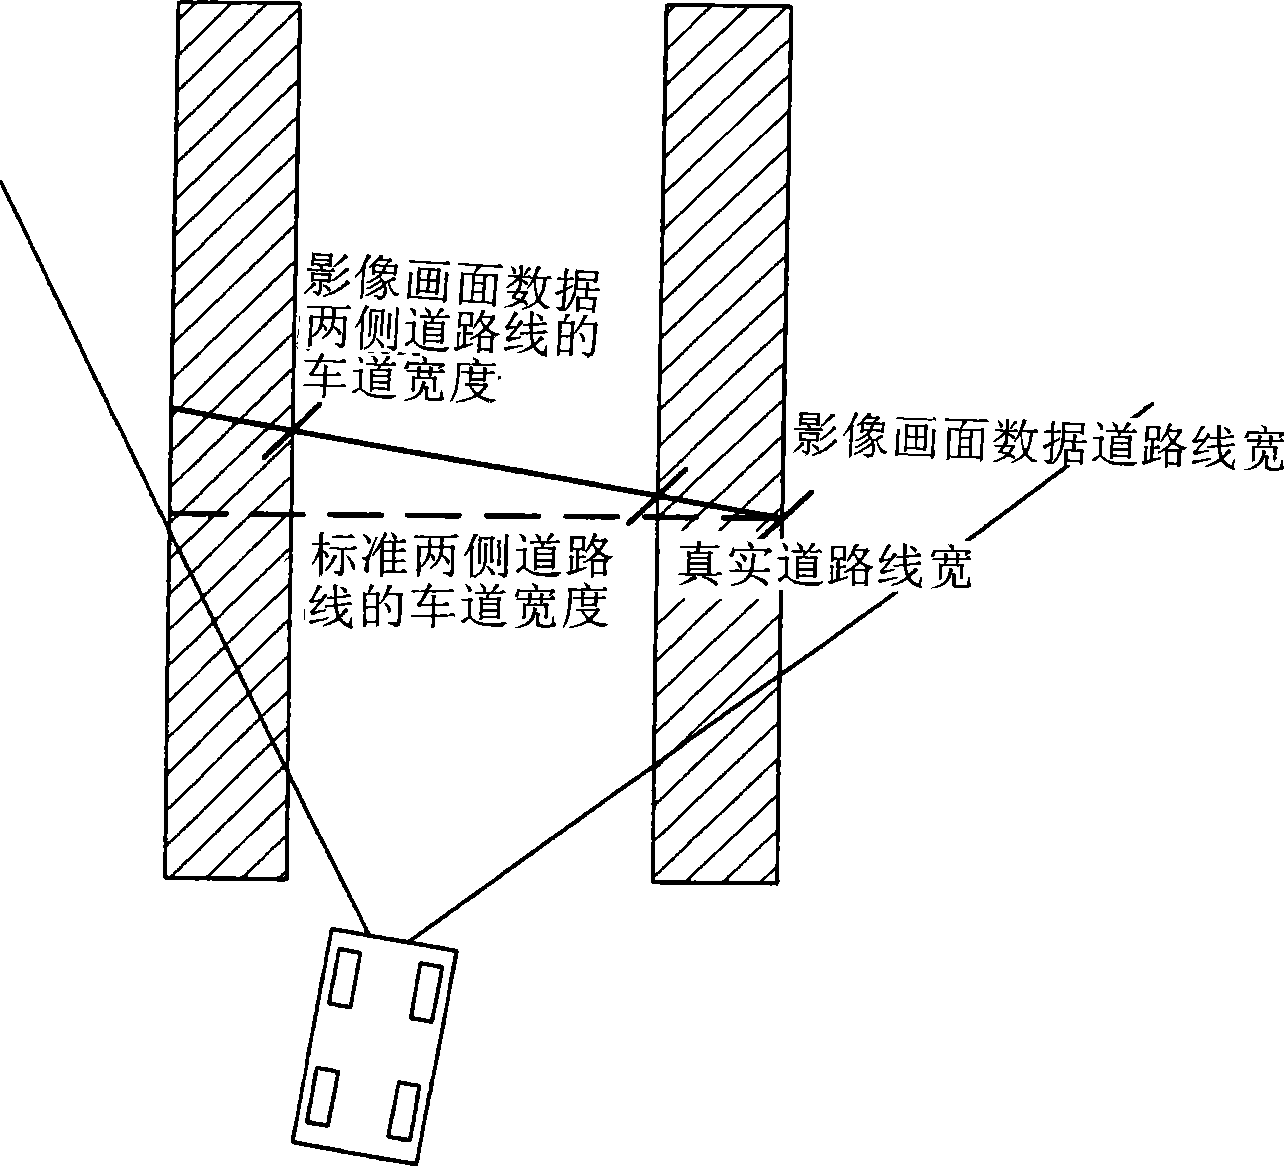 Vehicle shift inspection method and apparatus